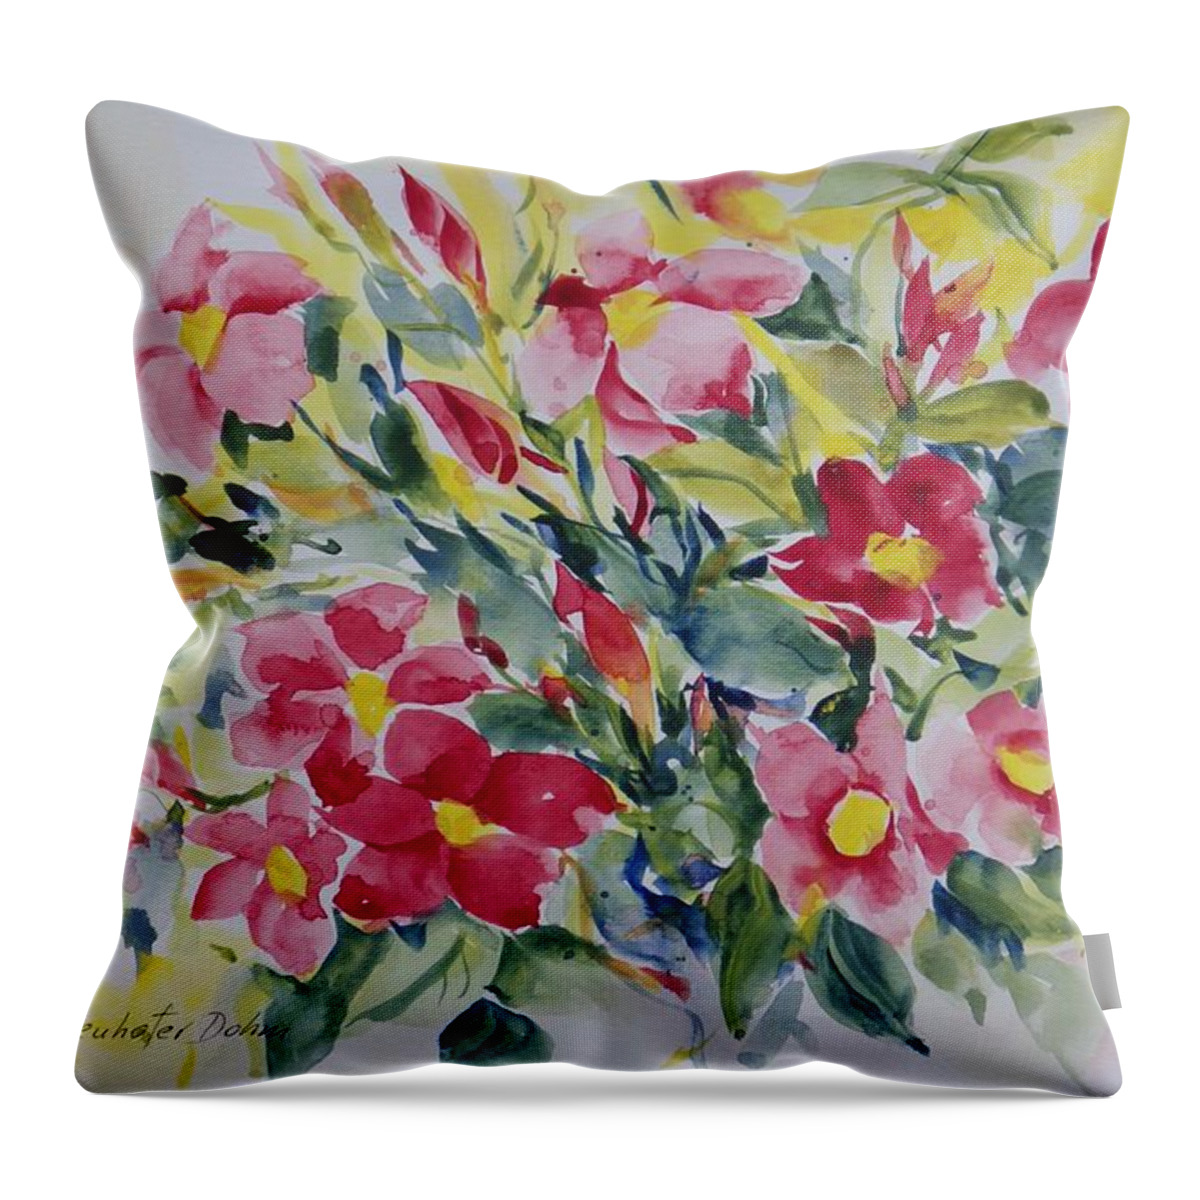 Flowers Throw Pillow featuring the painting Floral I by Ingrid Dohm